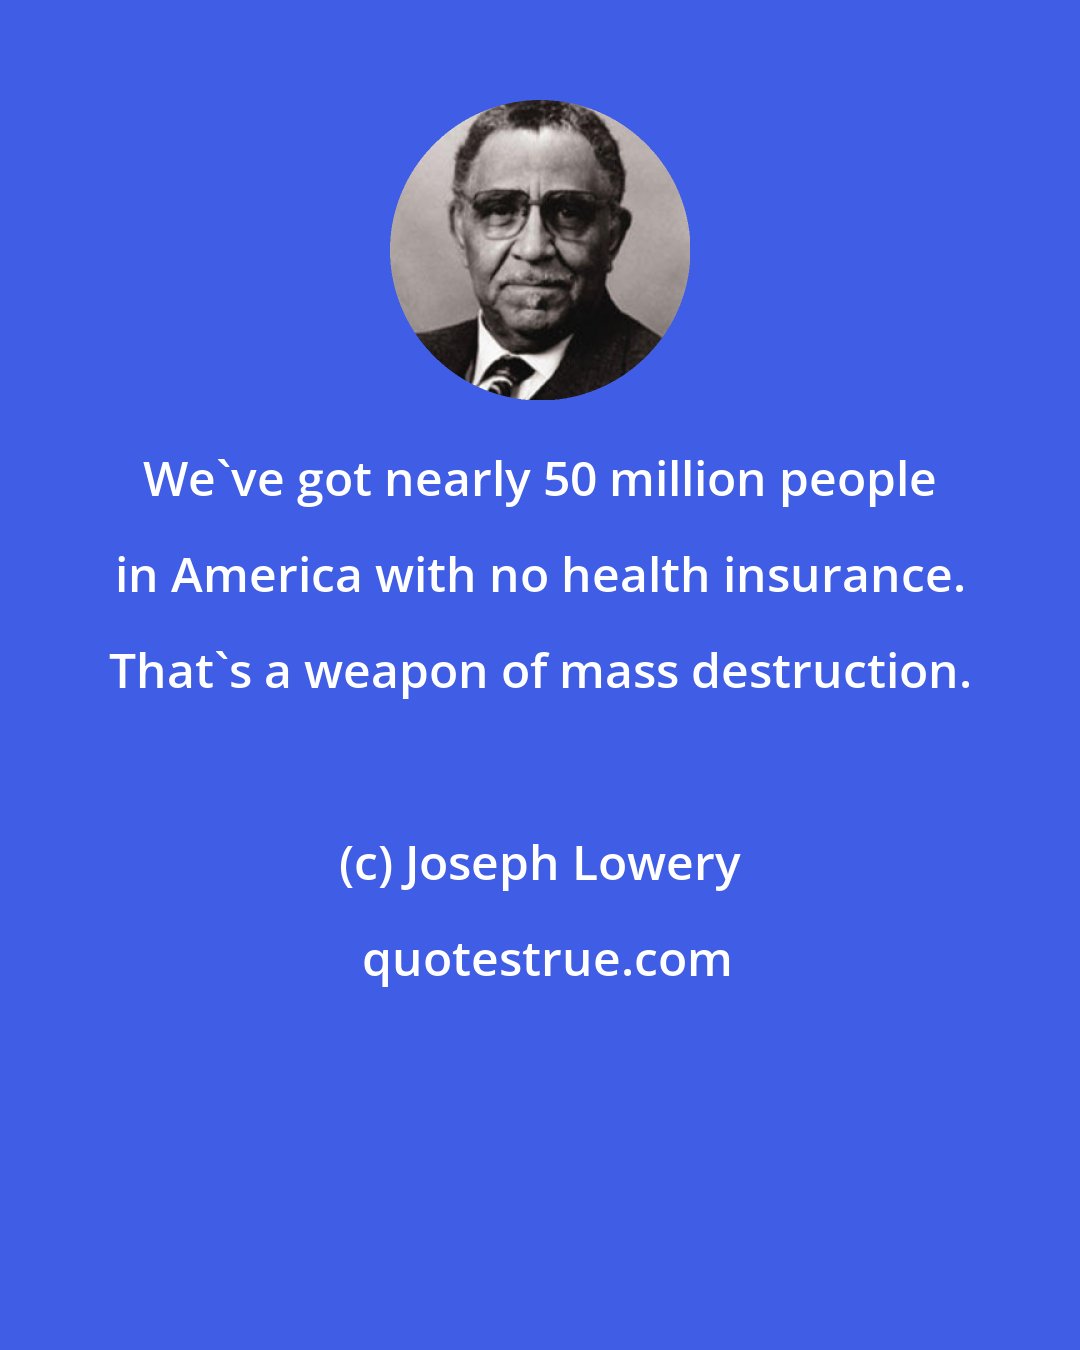 Joseph Lowery: We've got nearly 50 million people in America with no health insurance. That's a weapon of mass destruction.